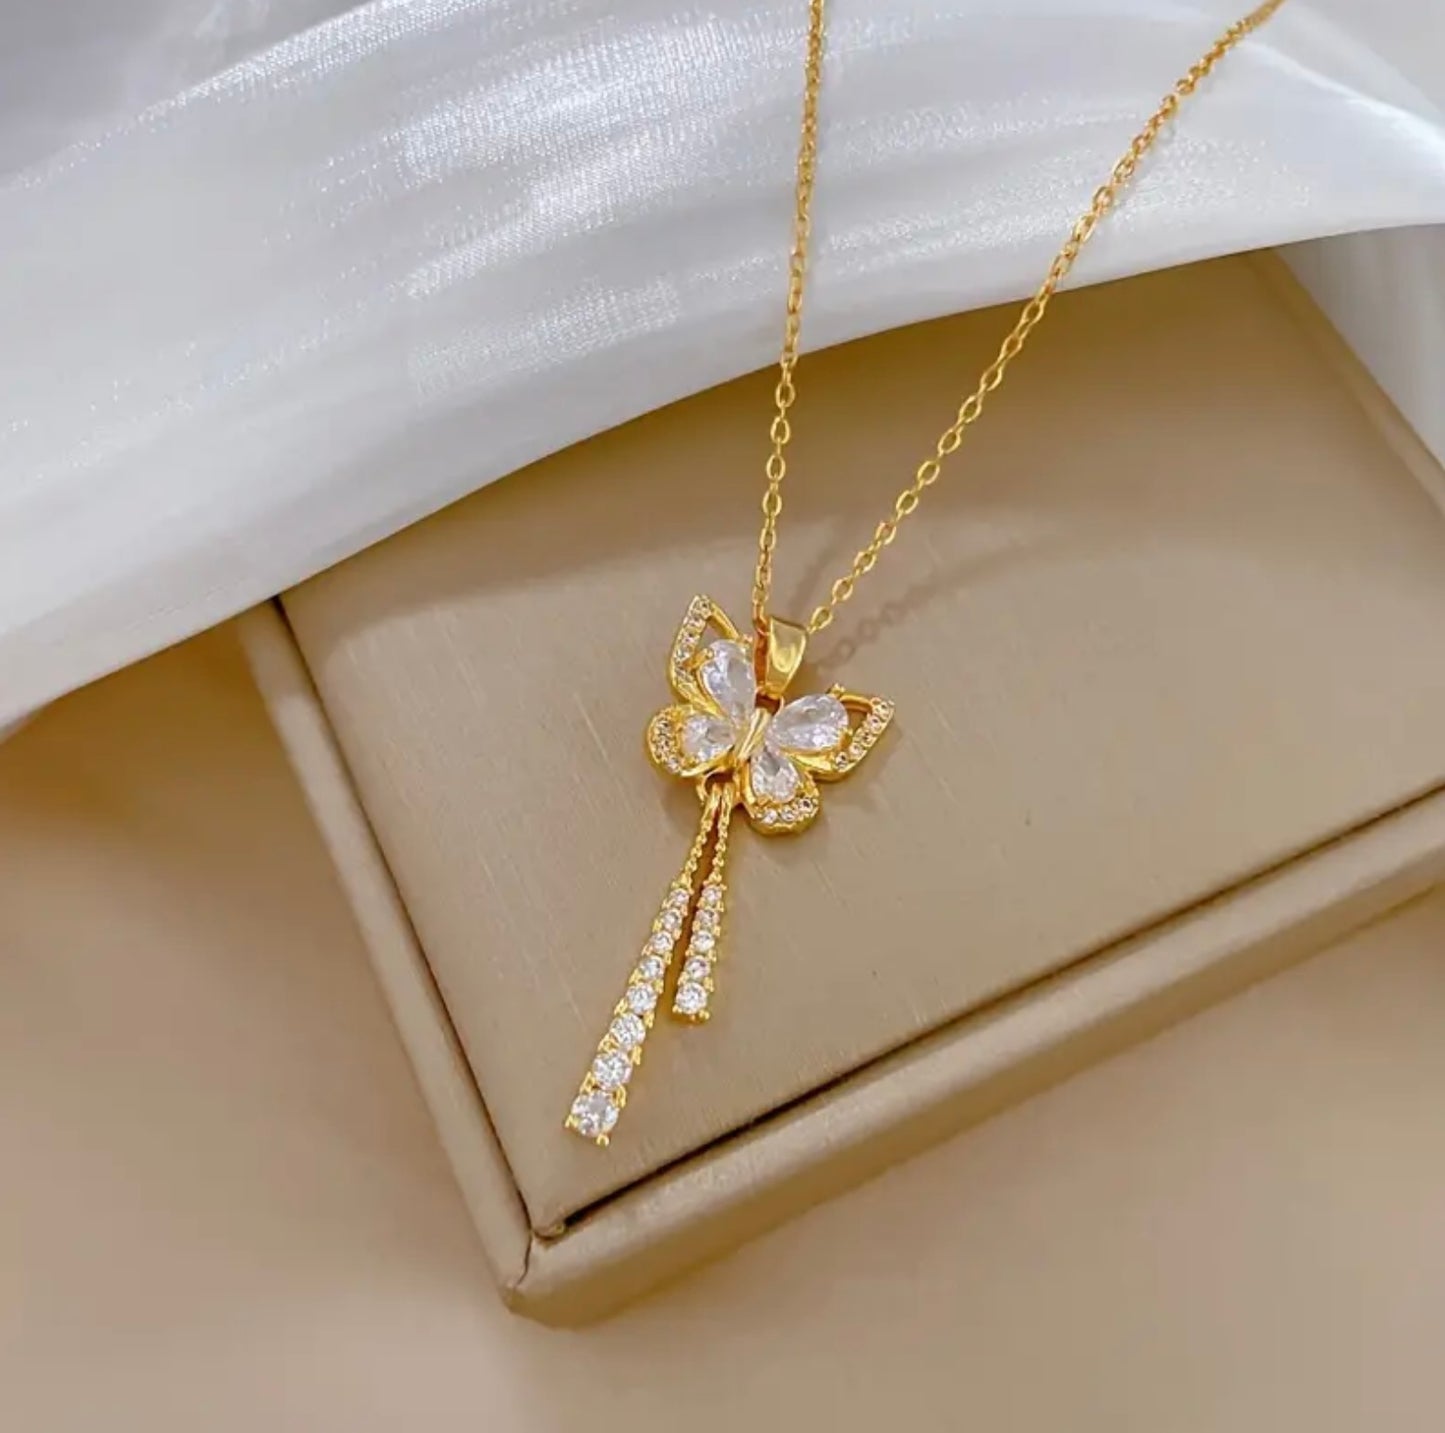 Mekki Butterfly Luxury Pendant Necklace Long Sparkling Cubic Zirconia Necklace Beautiful Gift